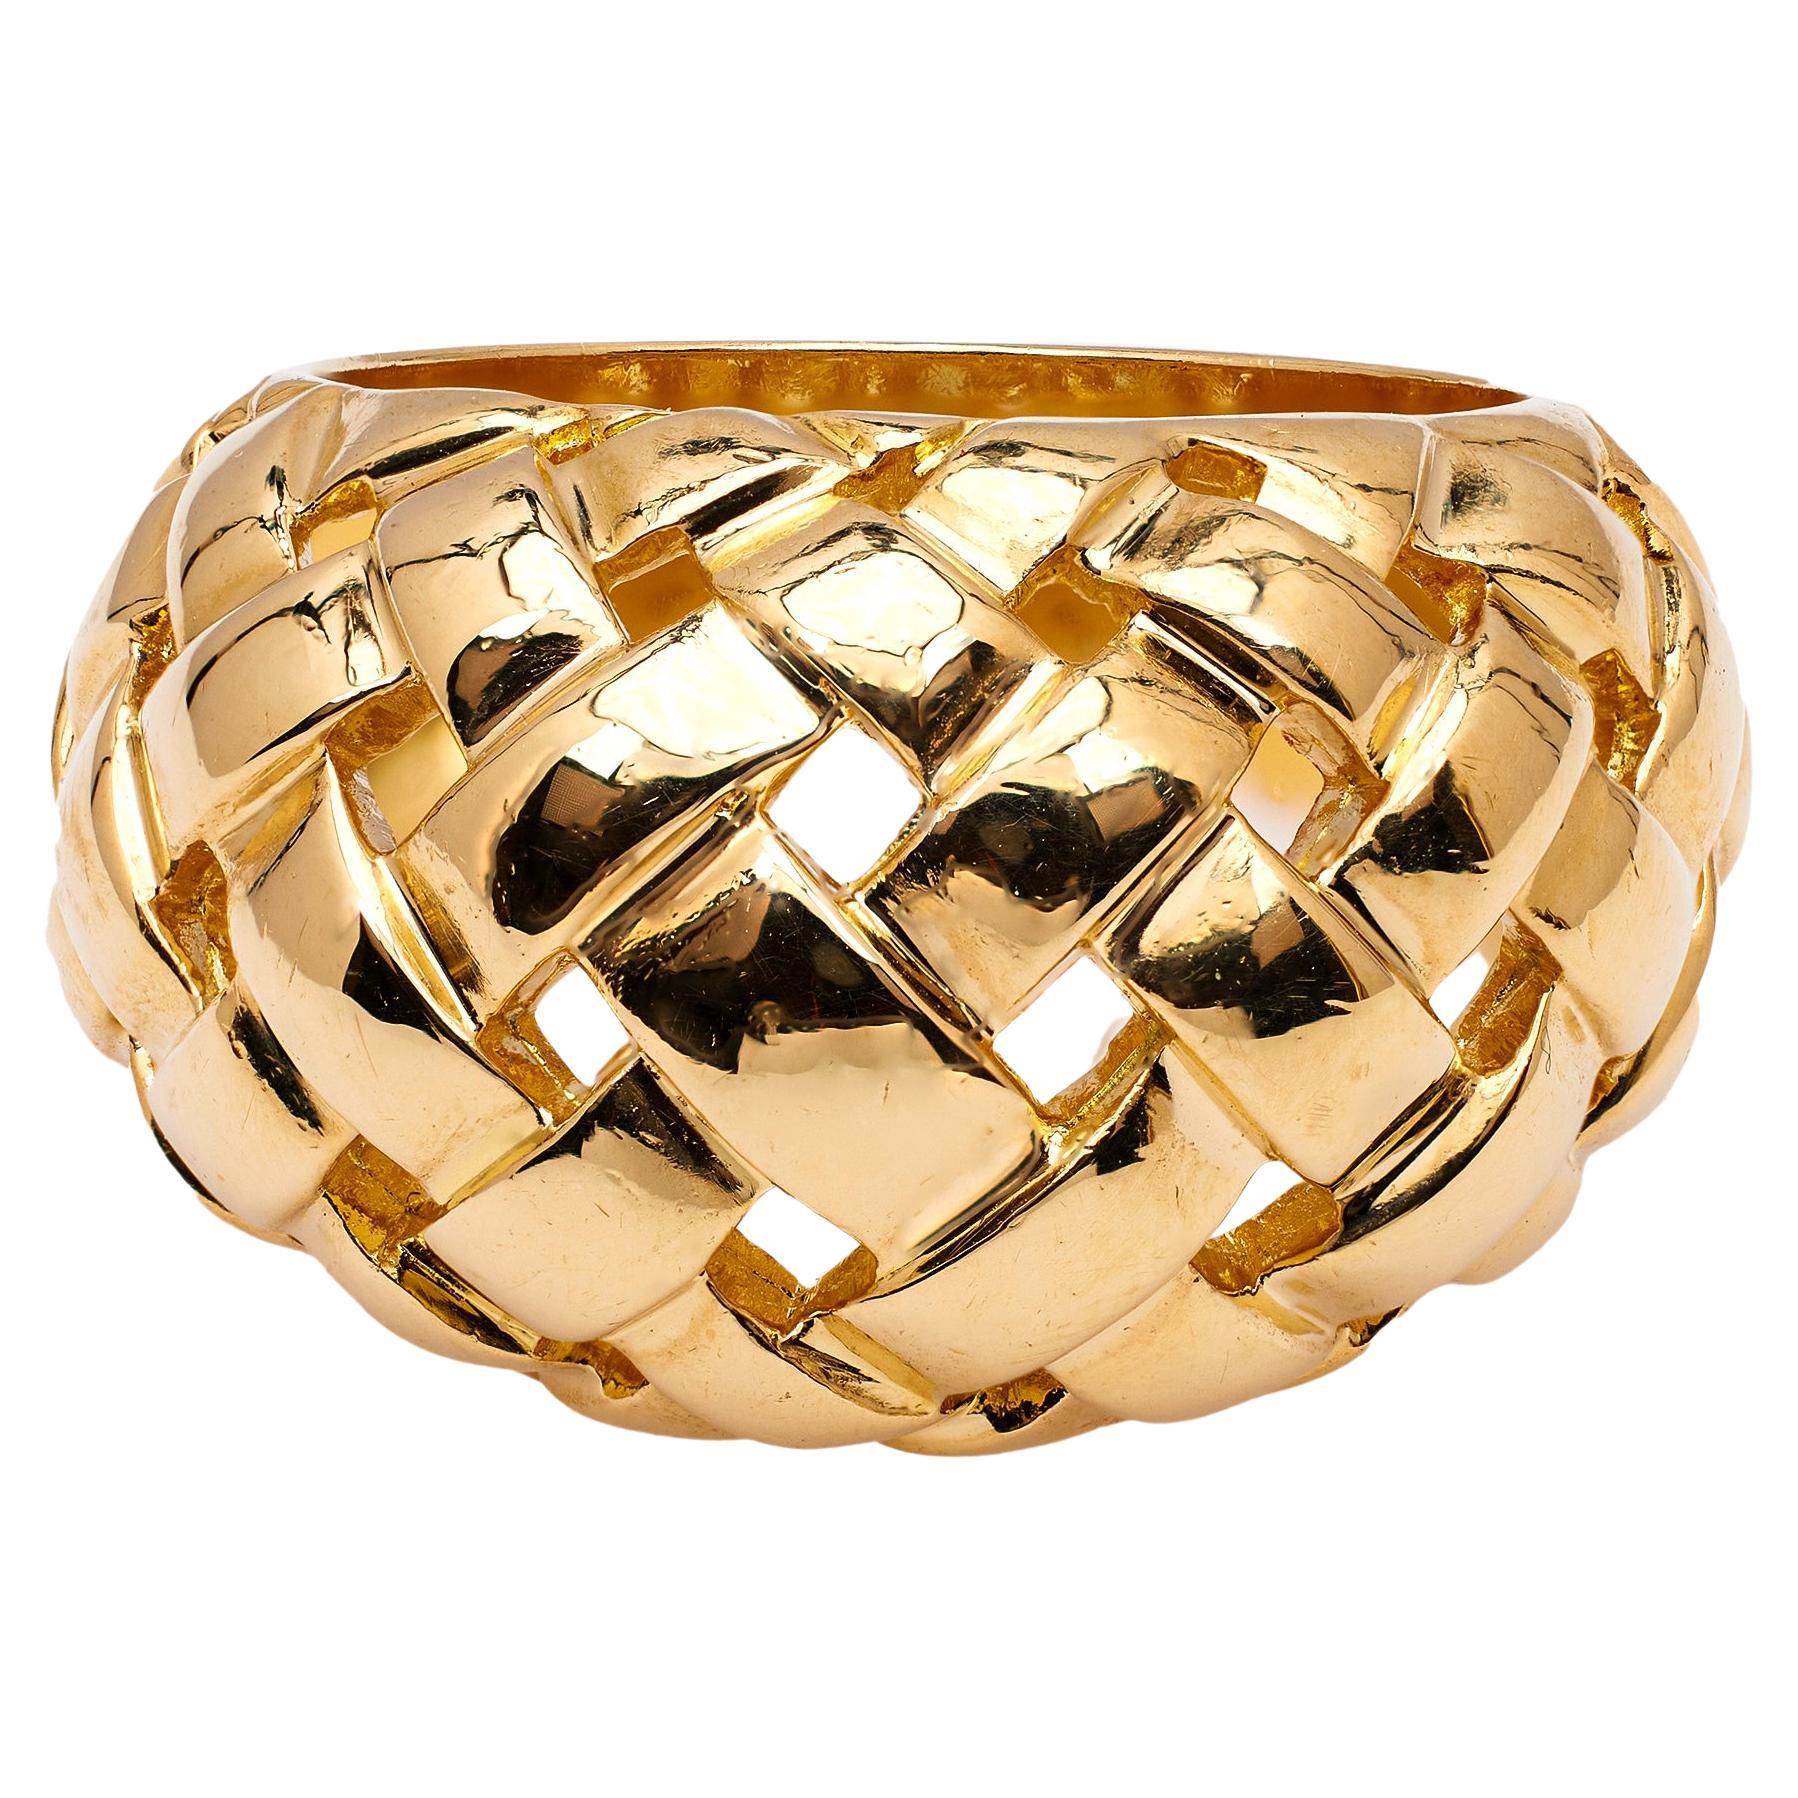 Vintage Tiffany & Co. 18k Yellow Golding Co. Woven Dome Ring